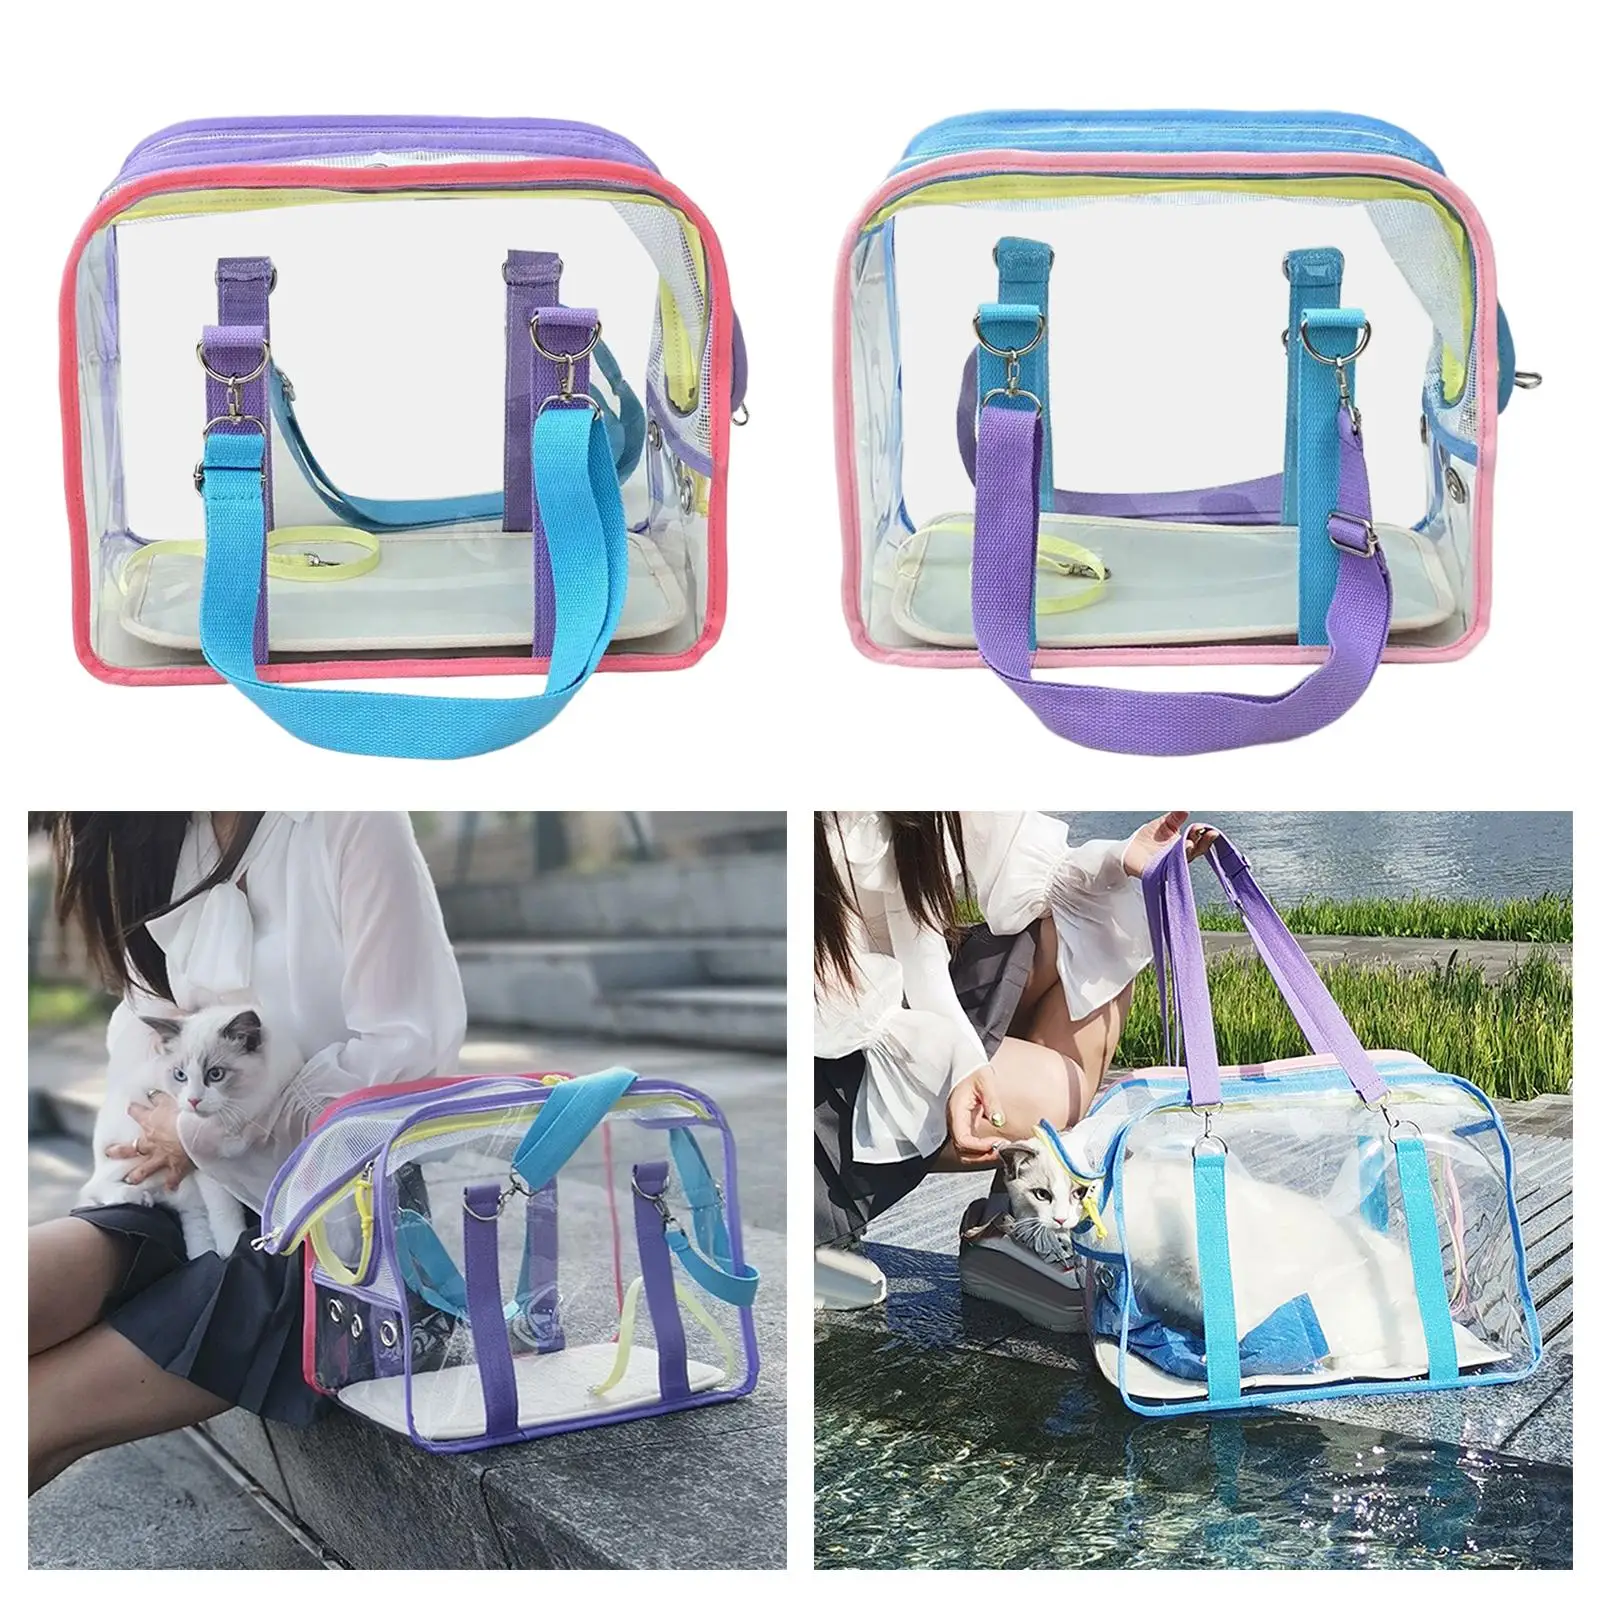 Breathable Pets Transport Bags Cats Ventilated Comfortable Durable Portable Pet Travel Carrier Cat Carrier for Holiday Travel